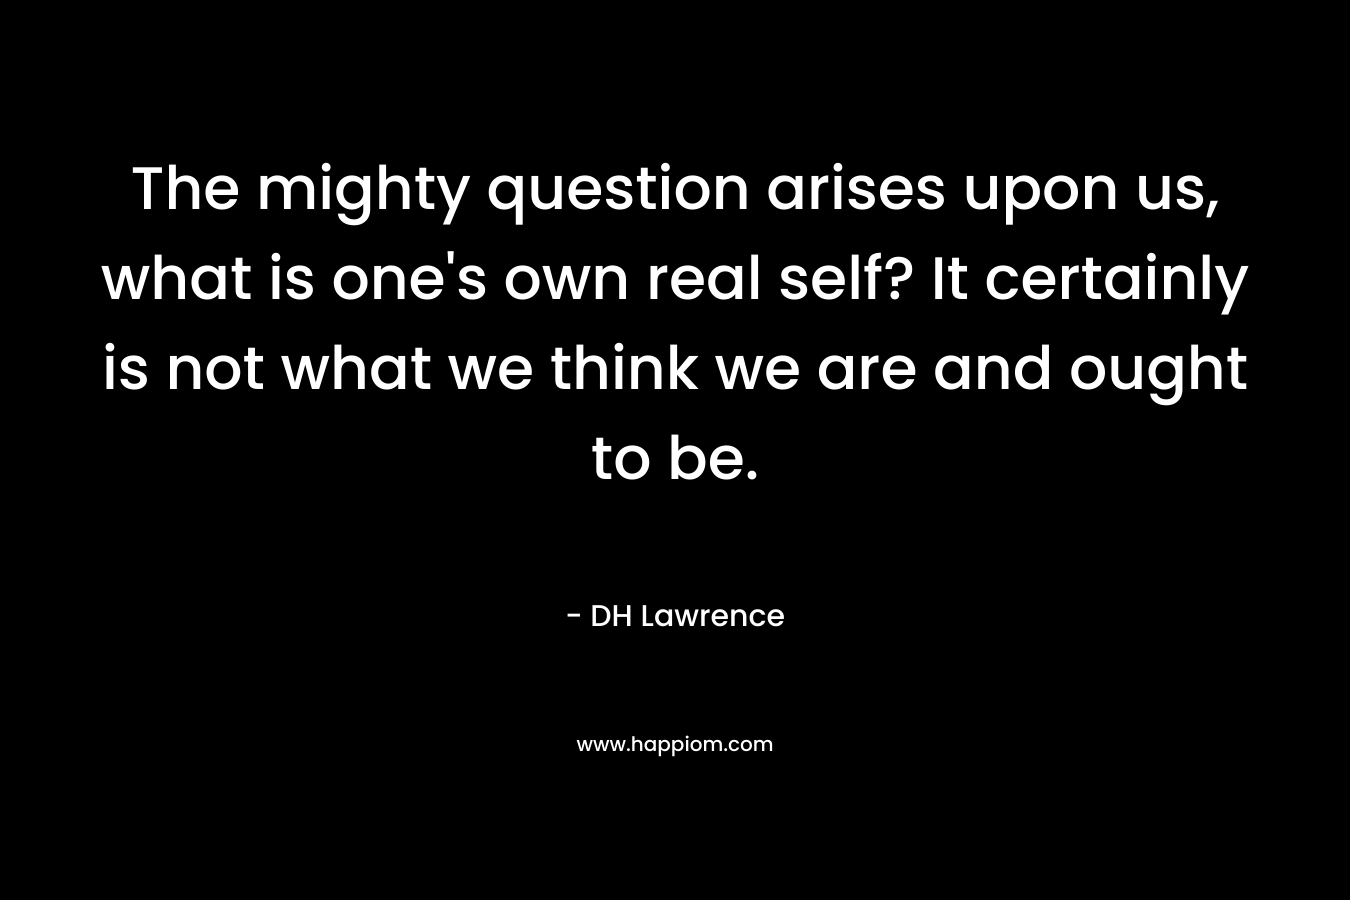 The mighty question arises upon us, what is one’s own real self? It certainly is not what we think we are and ought to be. – DH Lawrence